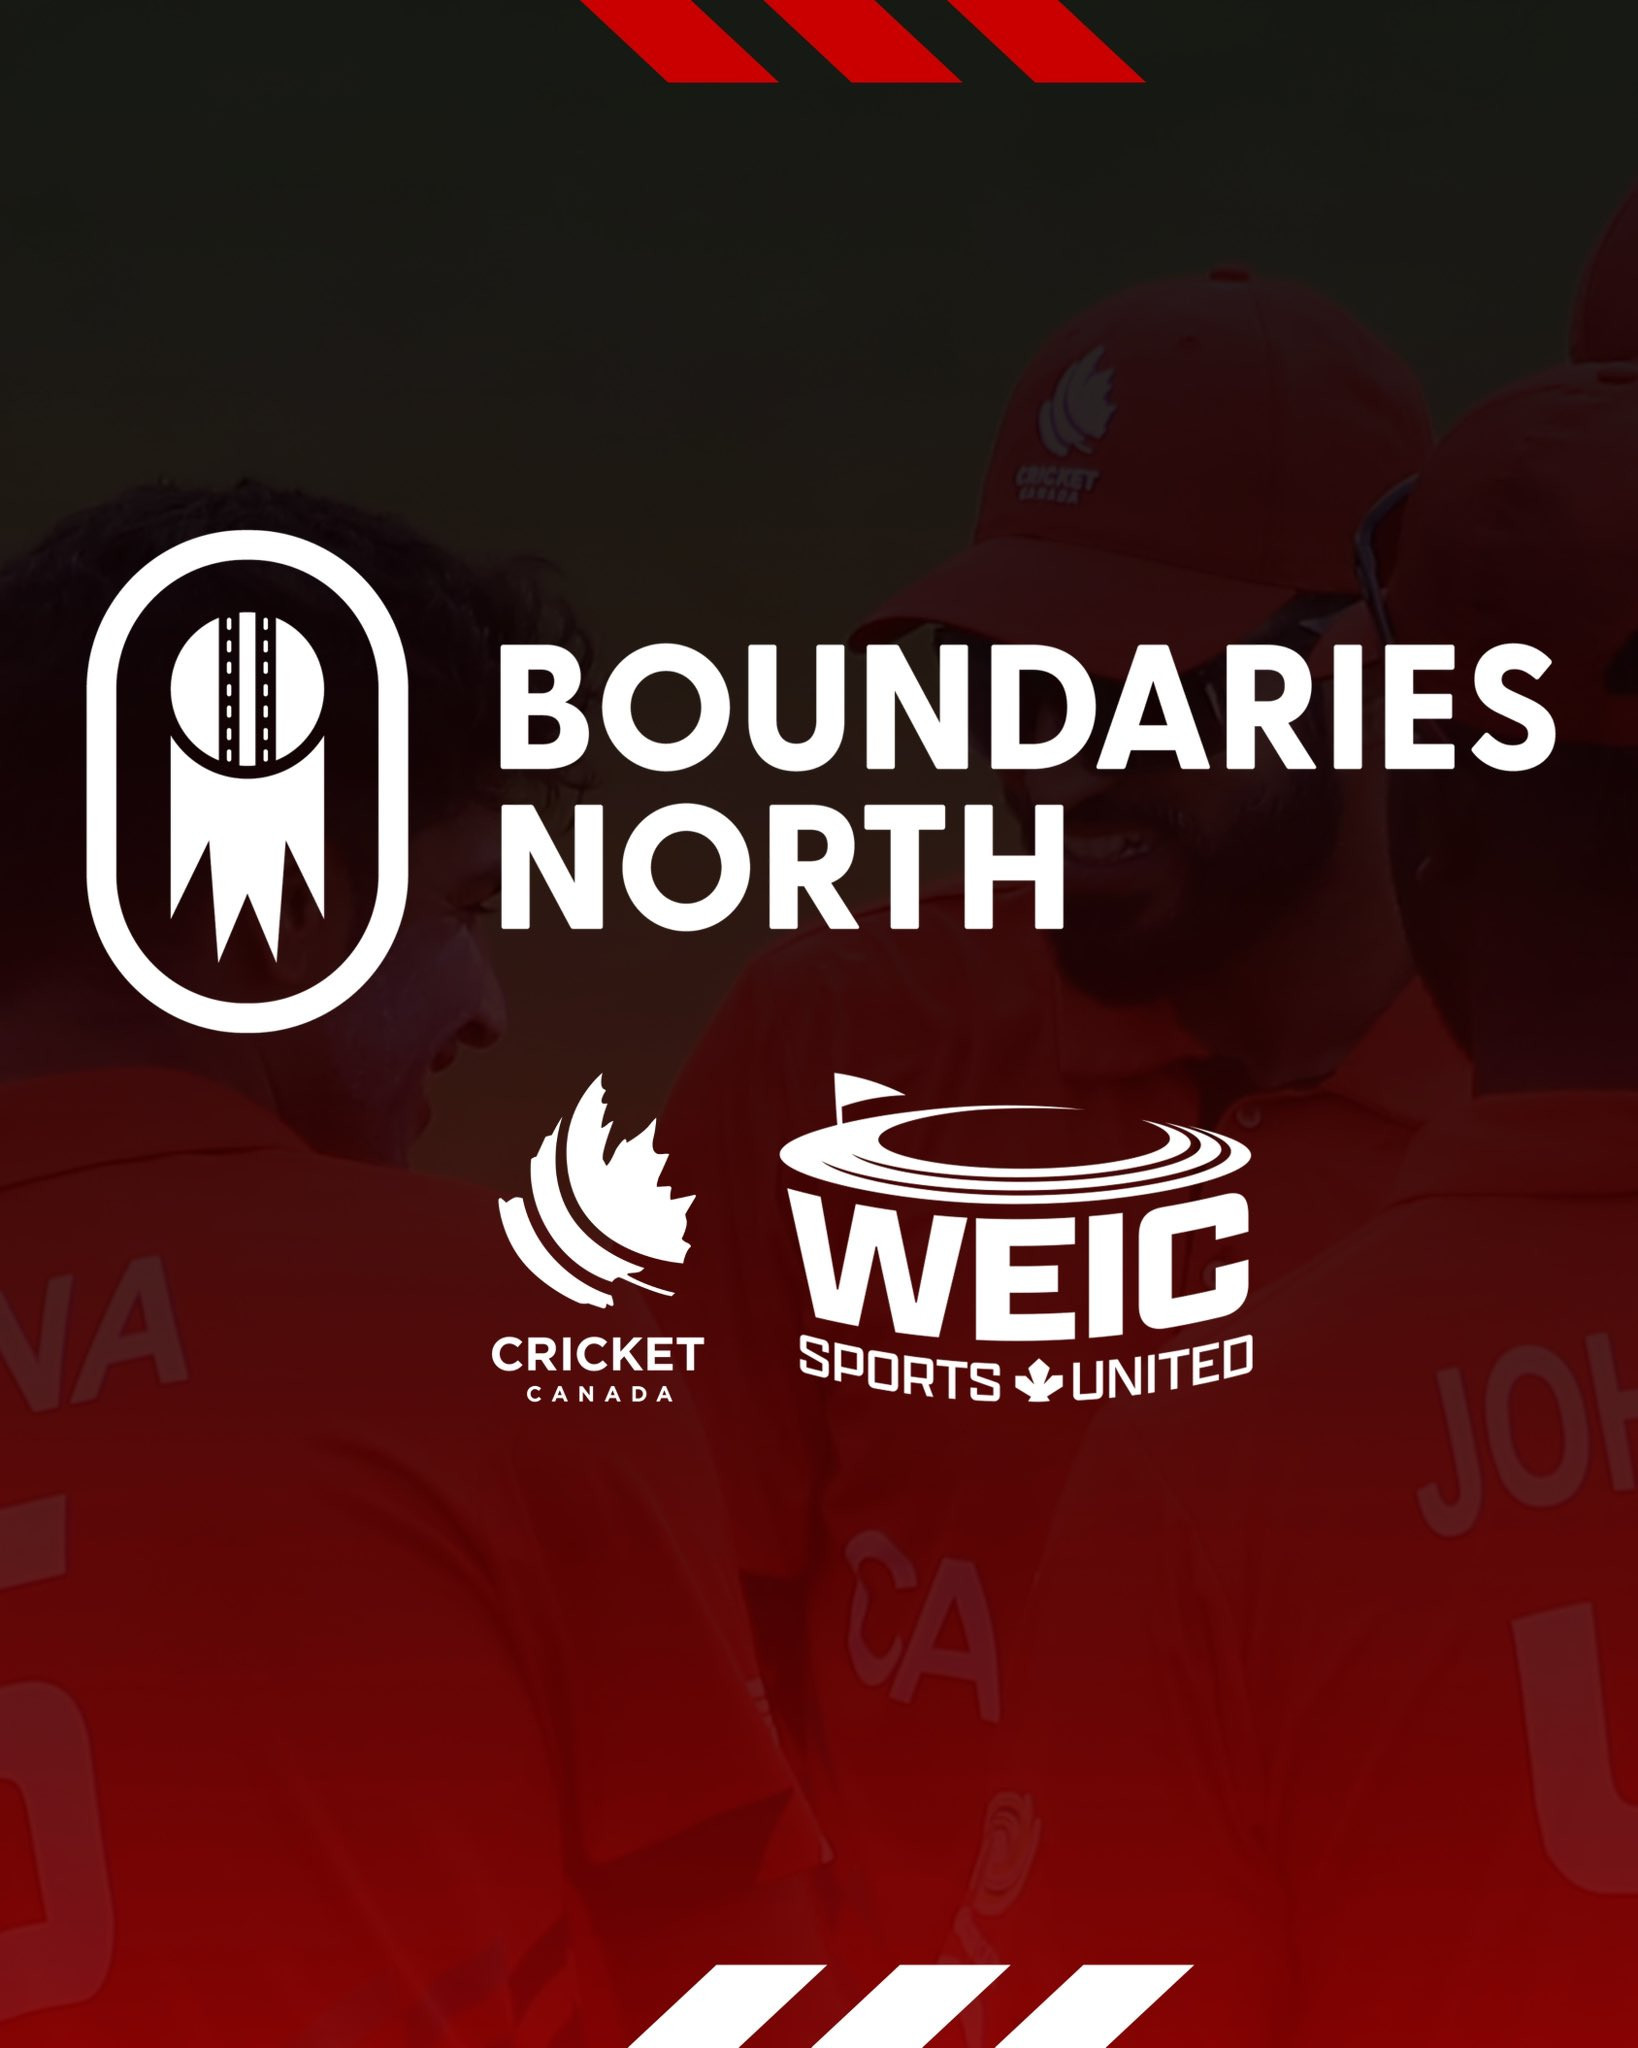 Boundaries North initiative launch to grow cricket in Canada